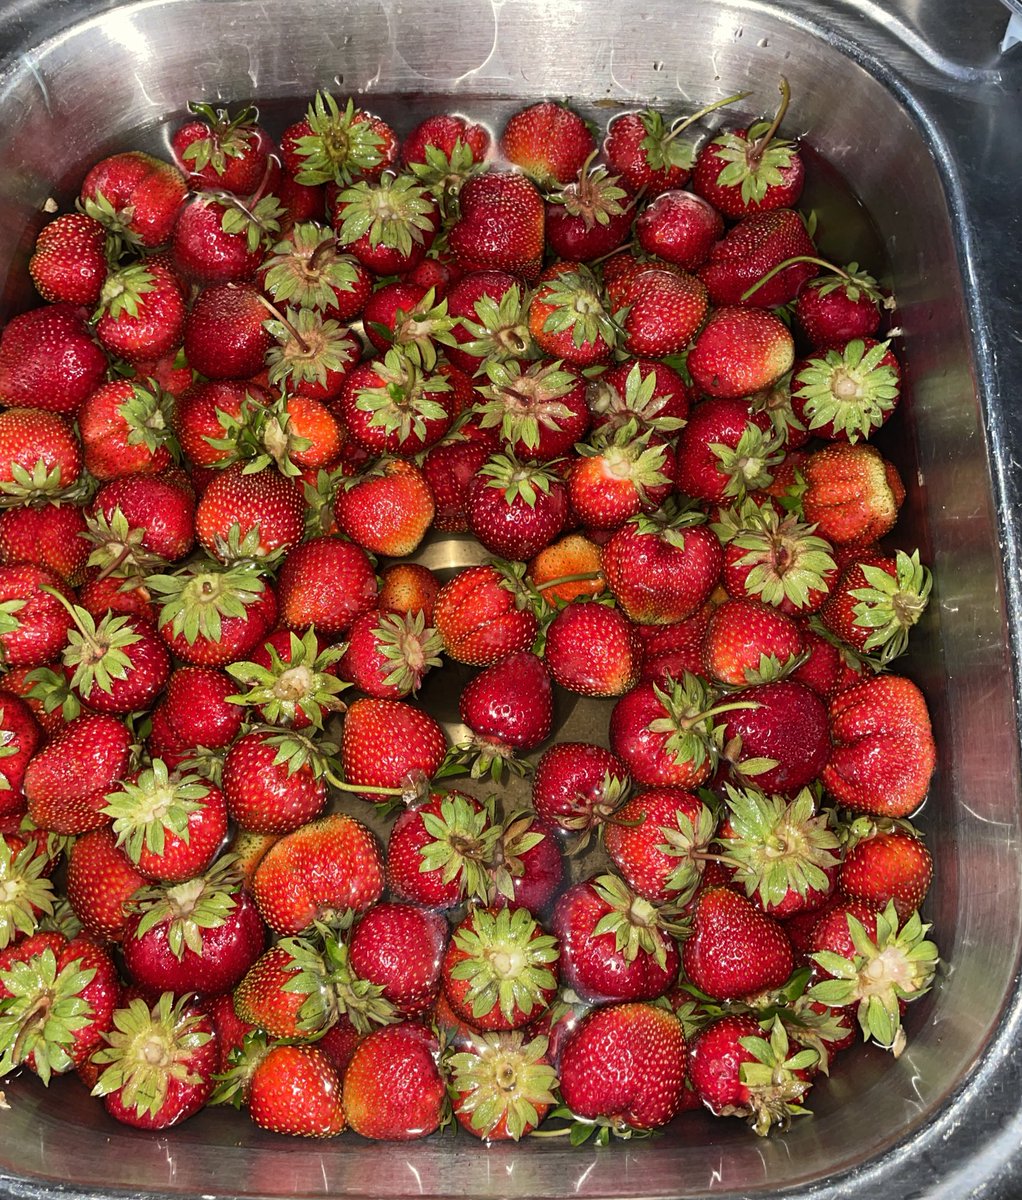 I look in my sink and it’s filled with strawberries, who did this?